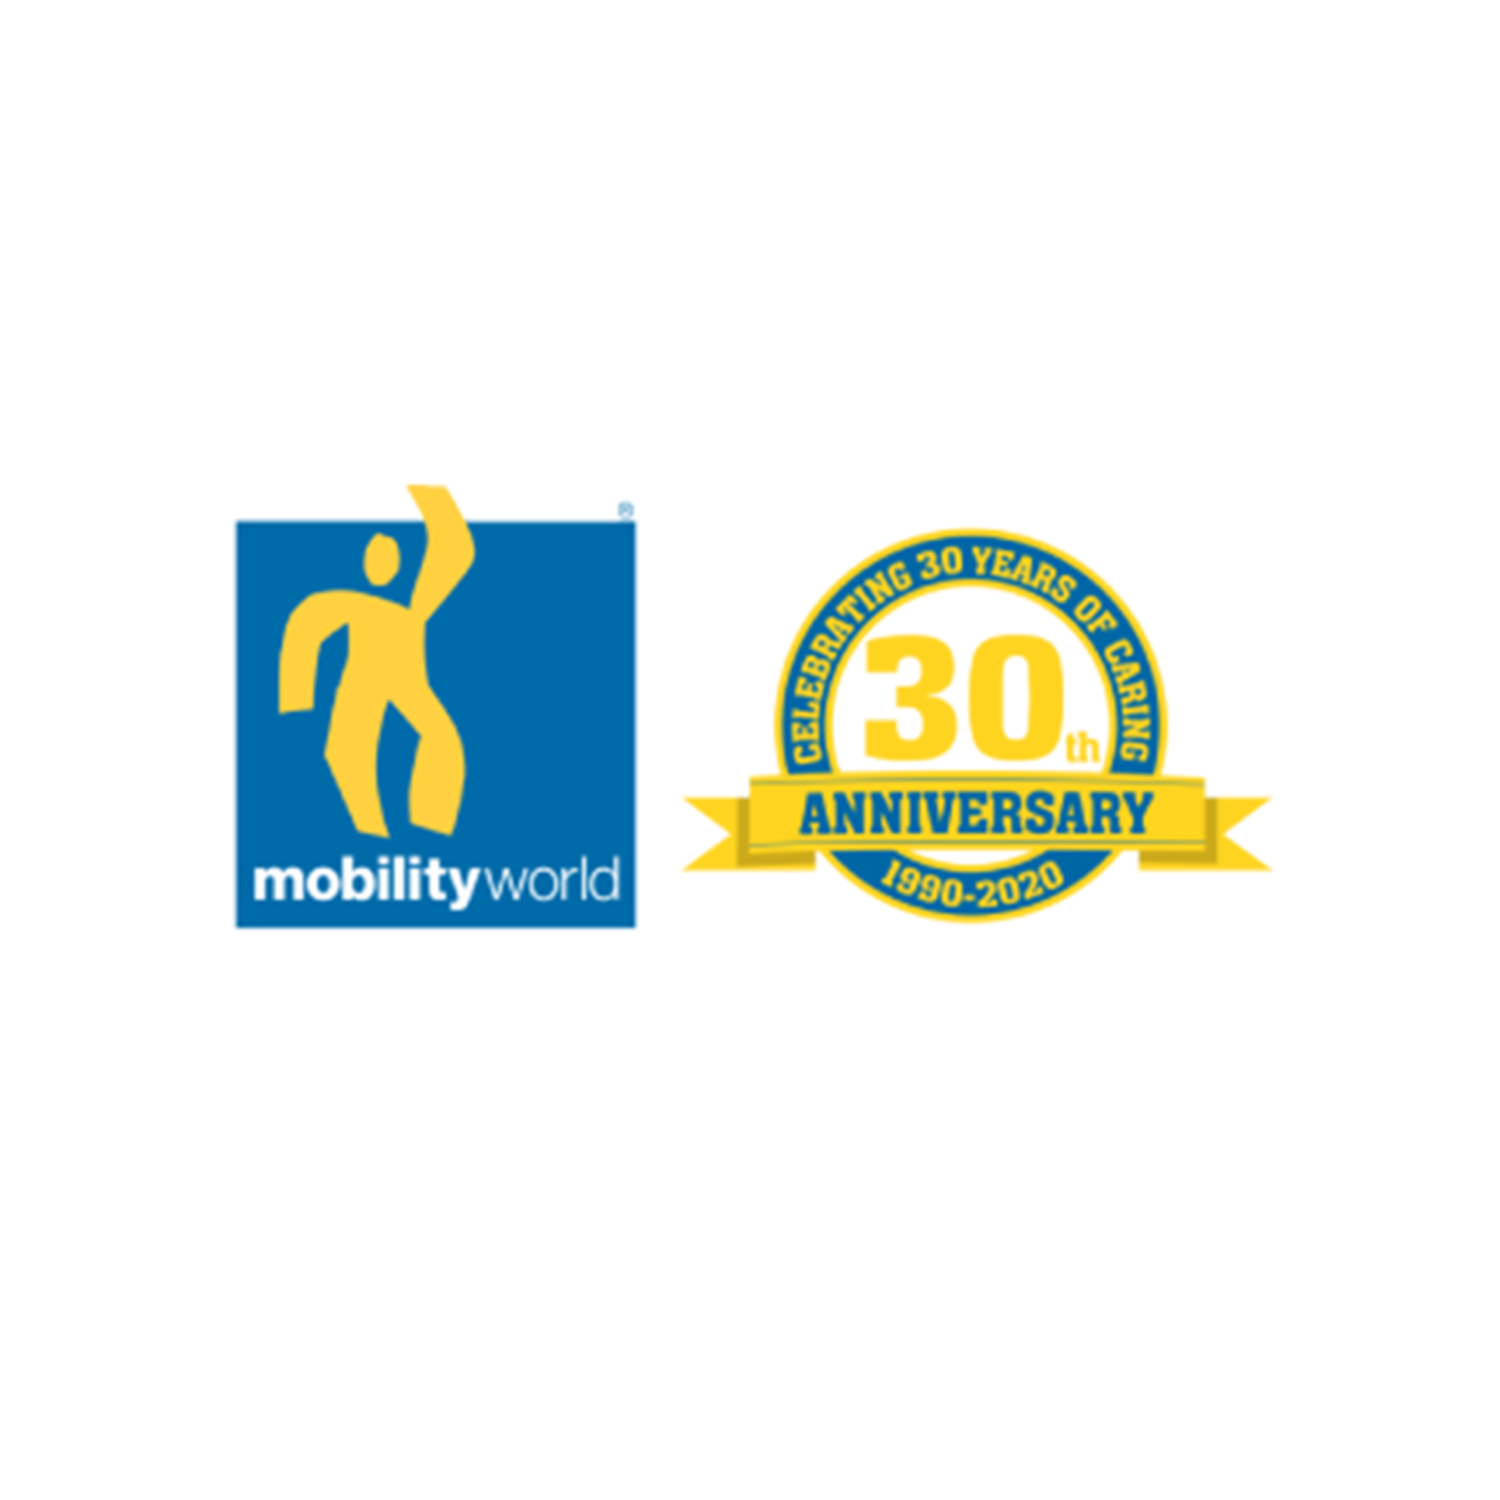 mobility world